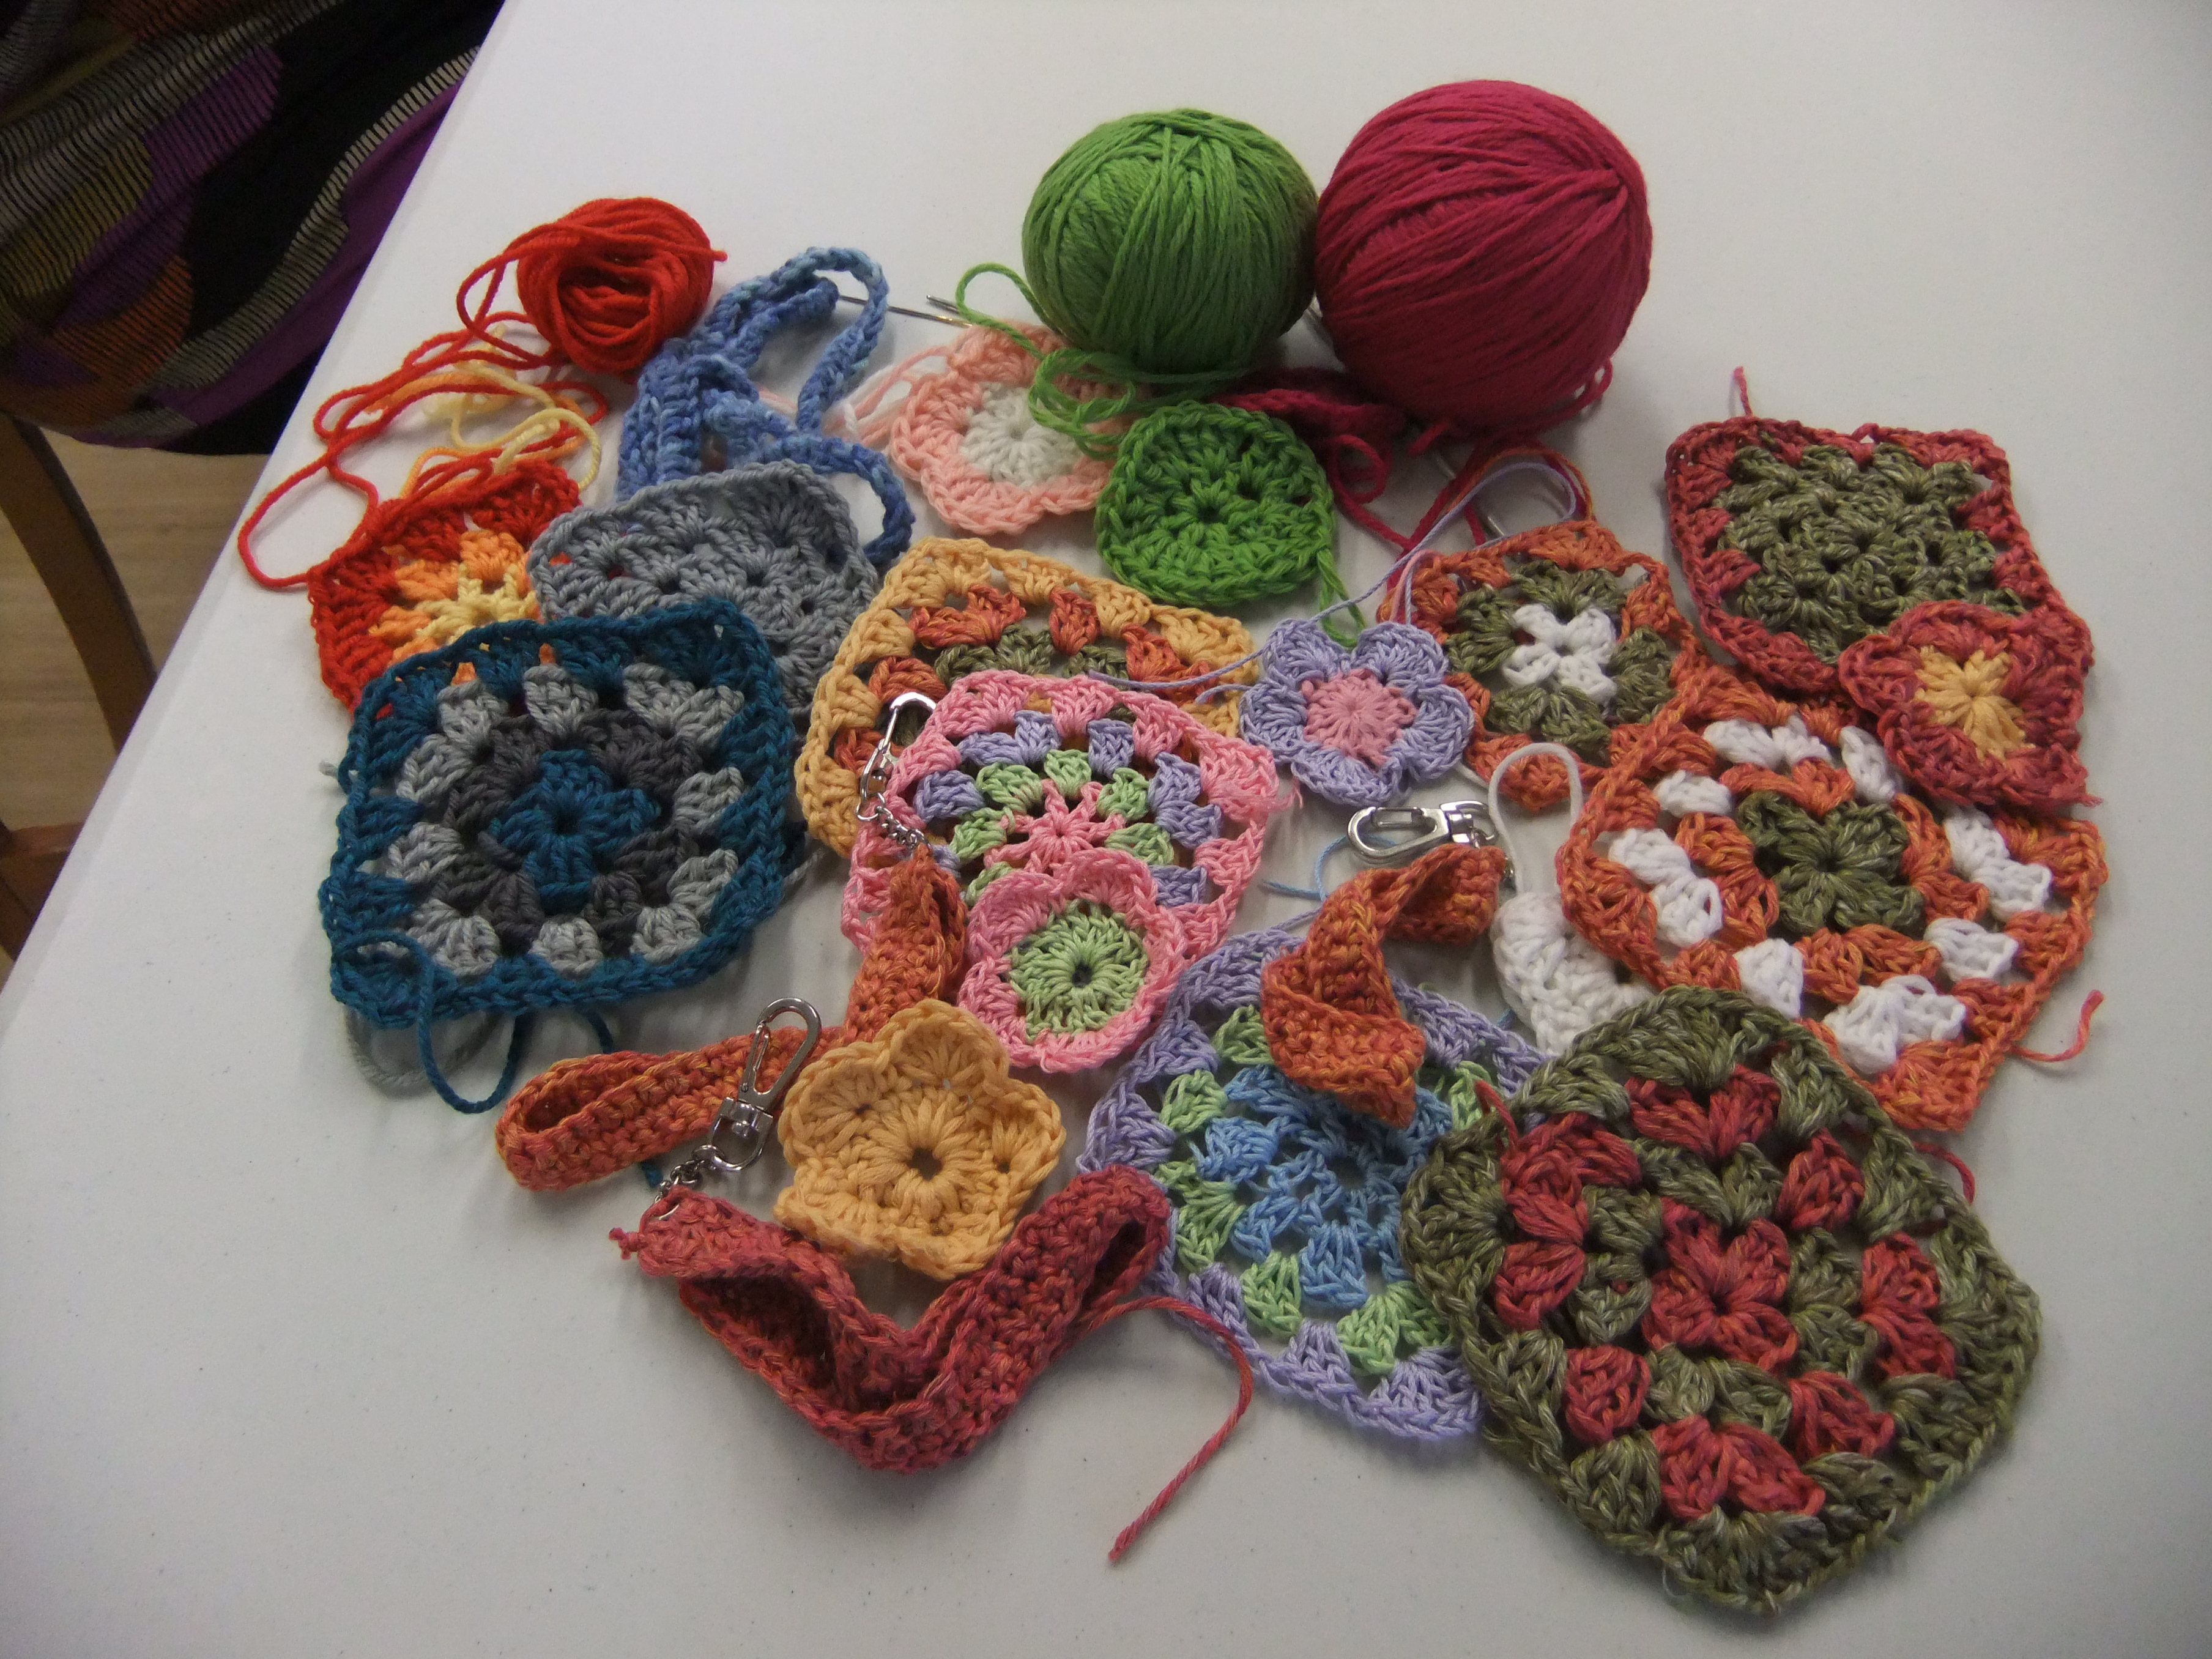 students' work from a crochet workshop with debbie tomkies of dt craft and design